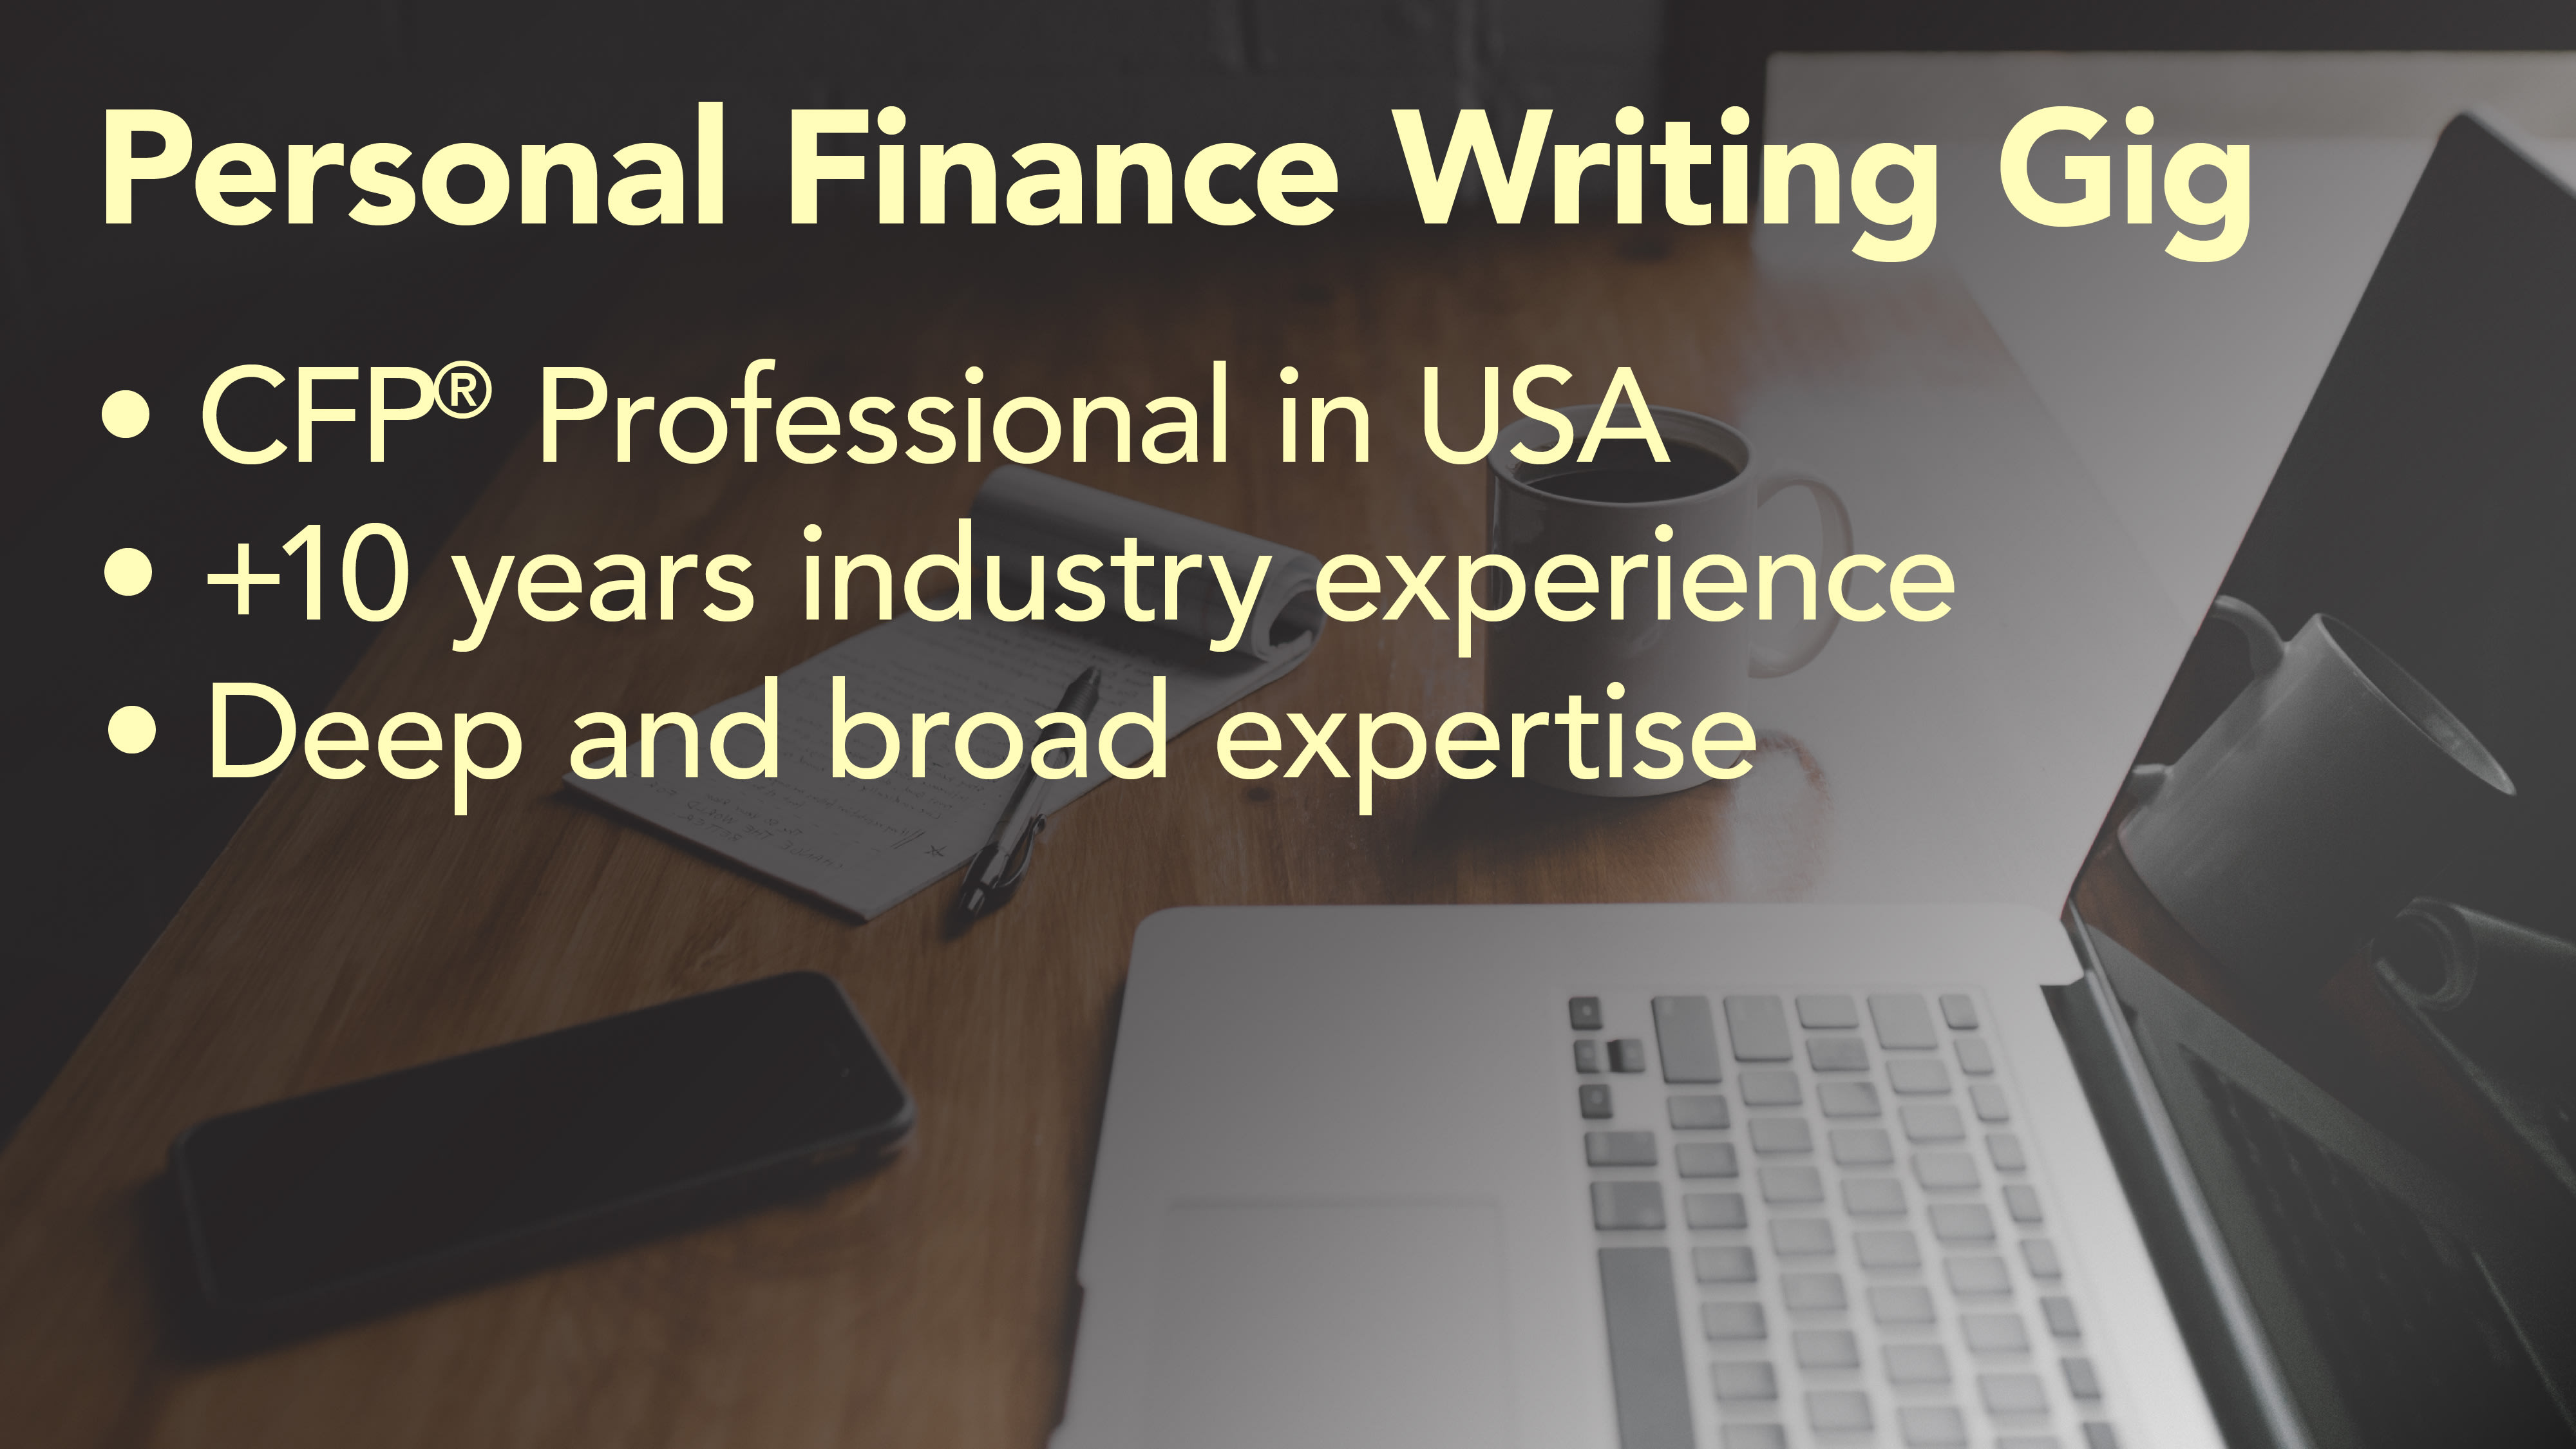 Write a professional personal finance article or blog post by